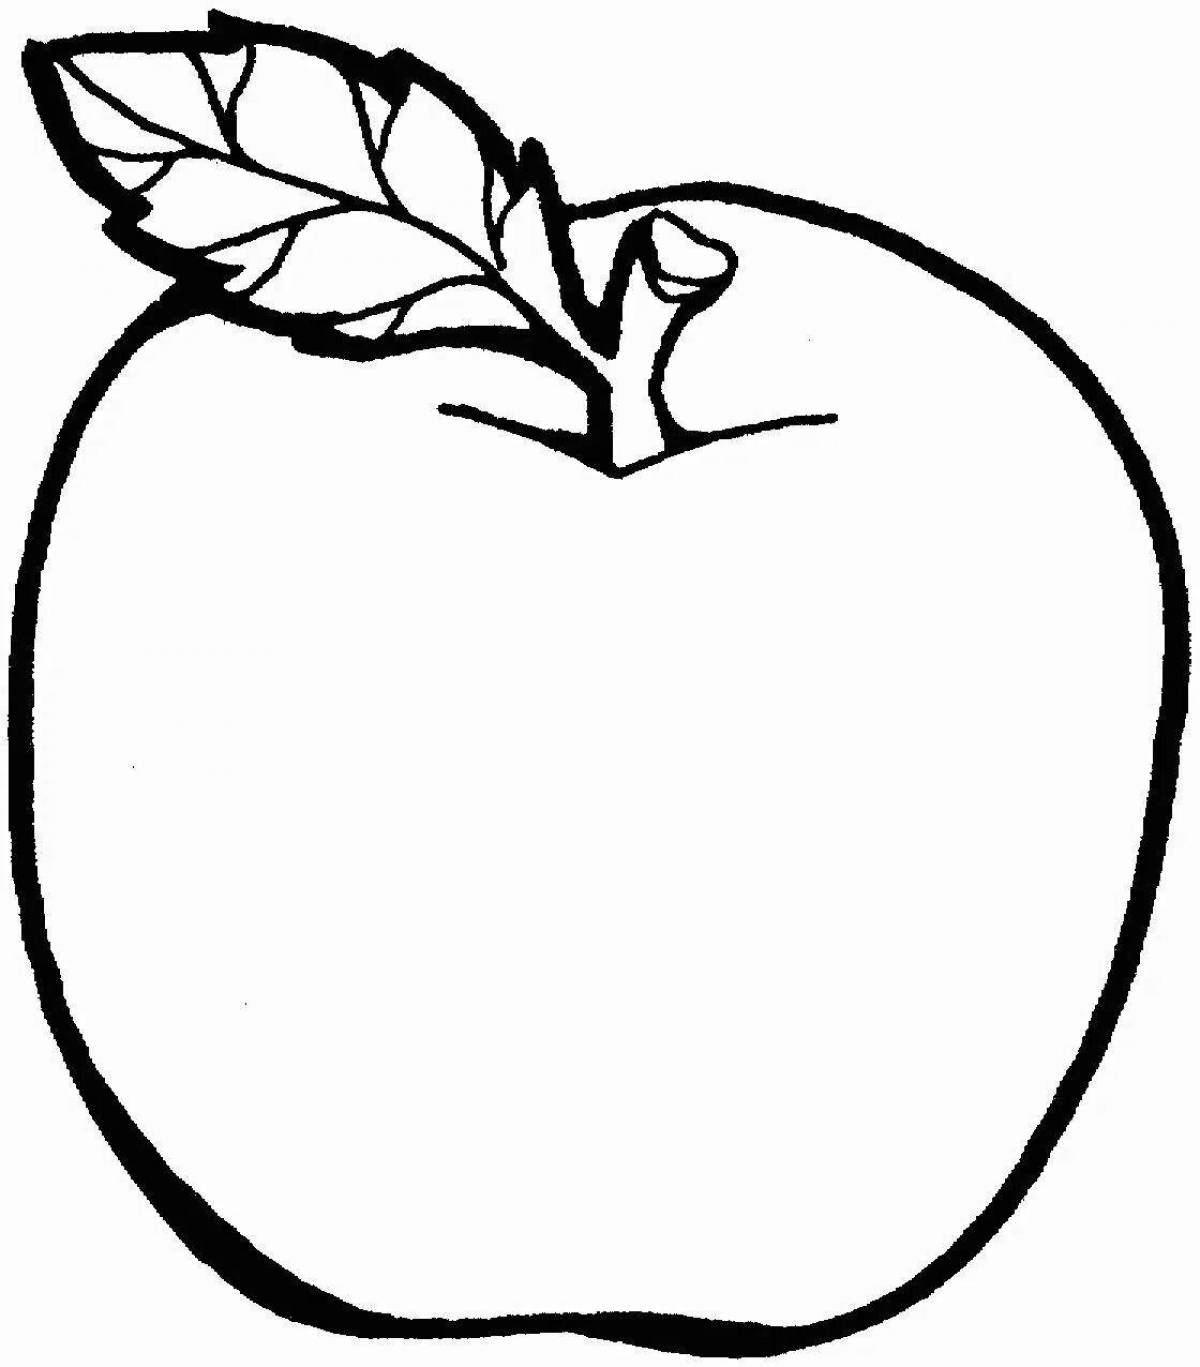 Delightful apple coloring book for kids